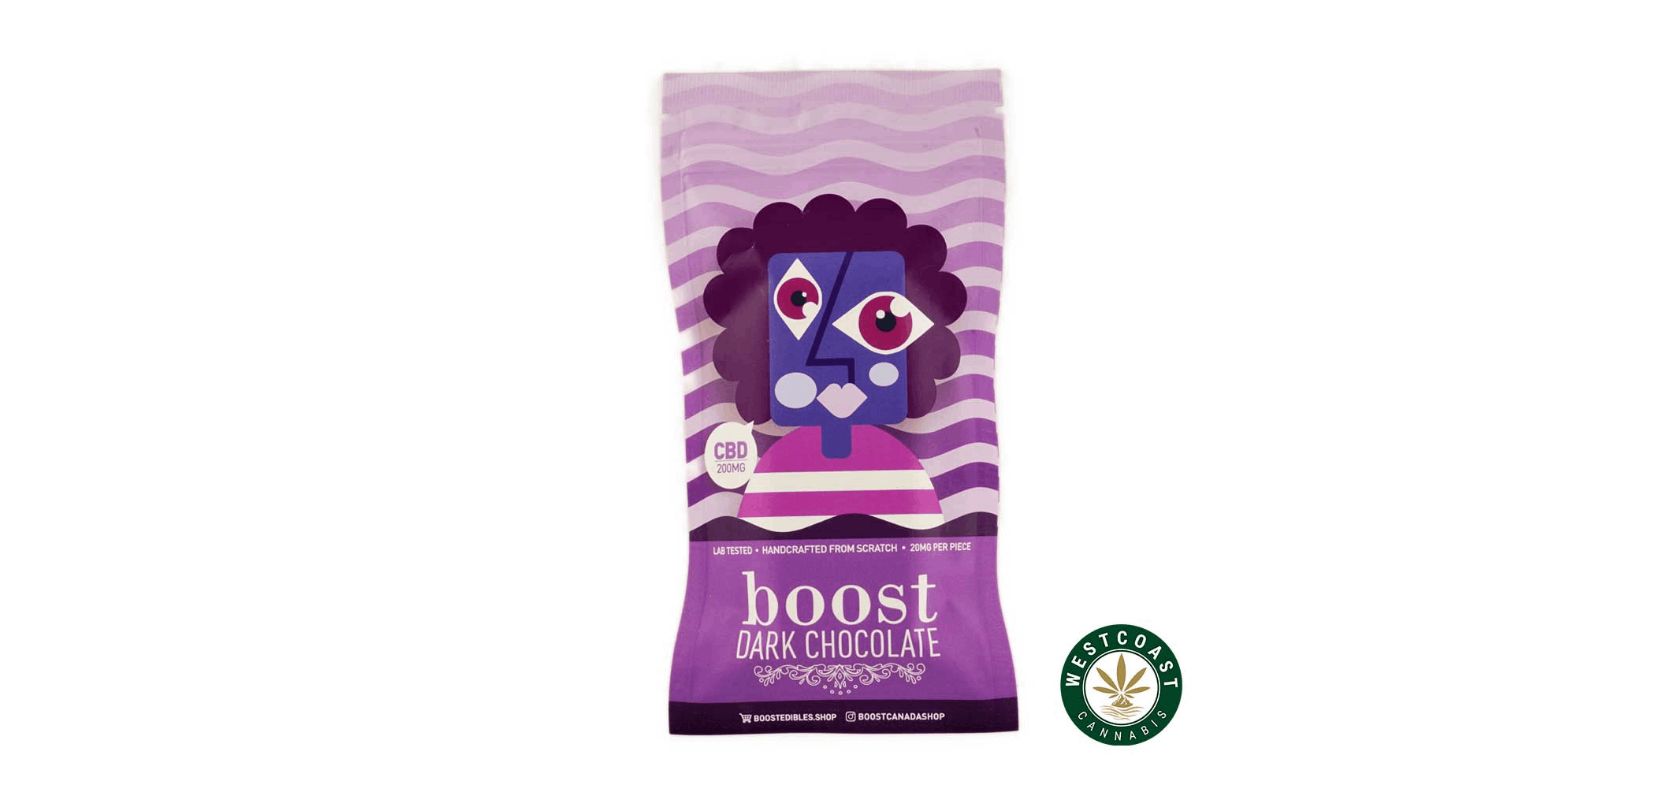 The Boost edibles- Dark Chocolate 200mg CBD is the very definition of bittersweet. This delicious treat gives you the savoury goodness of dark chocolate without the cannabis taste or smell. 